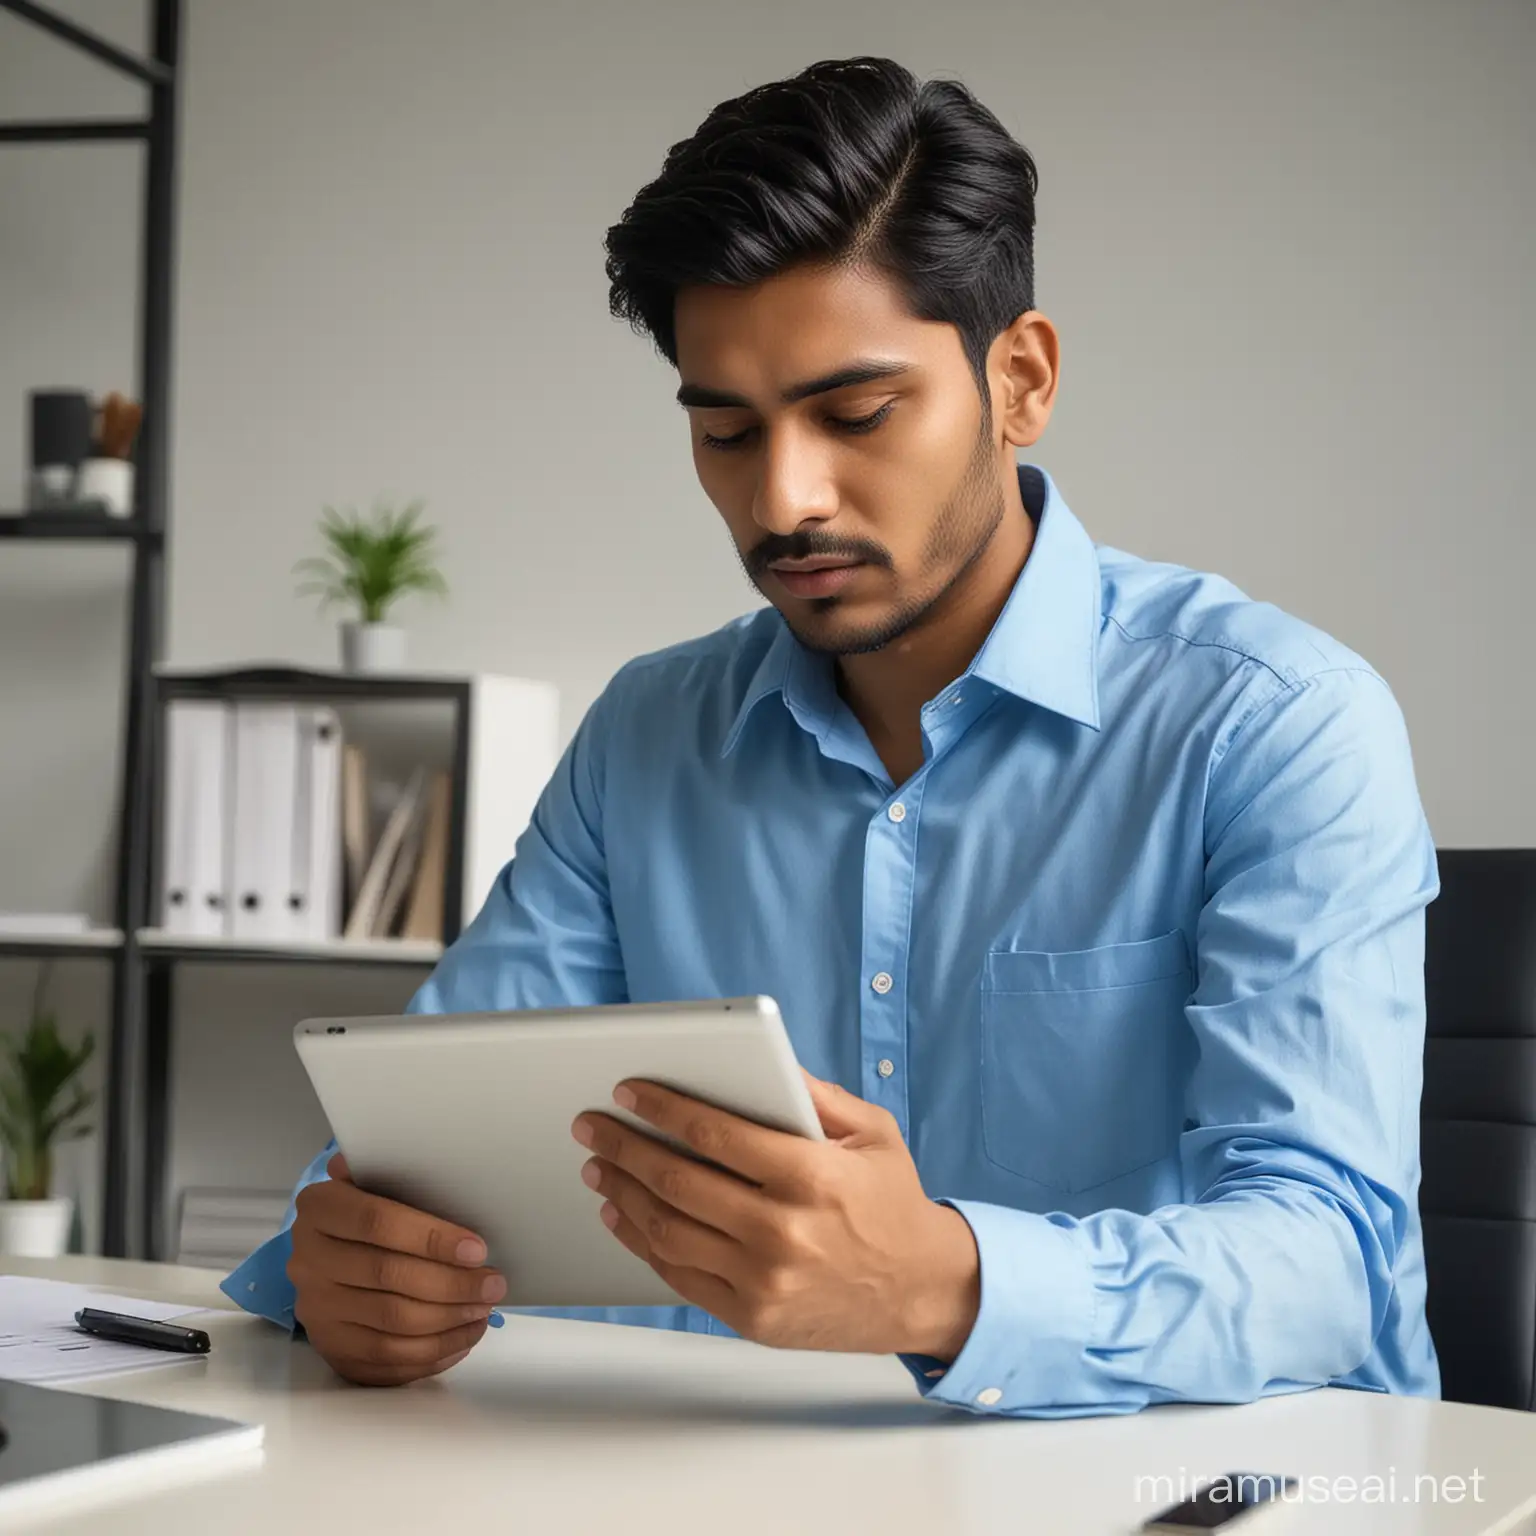 young indian man wear blue Shirt, uses tablet. working at office